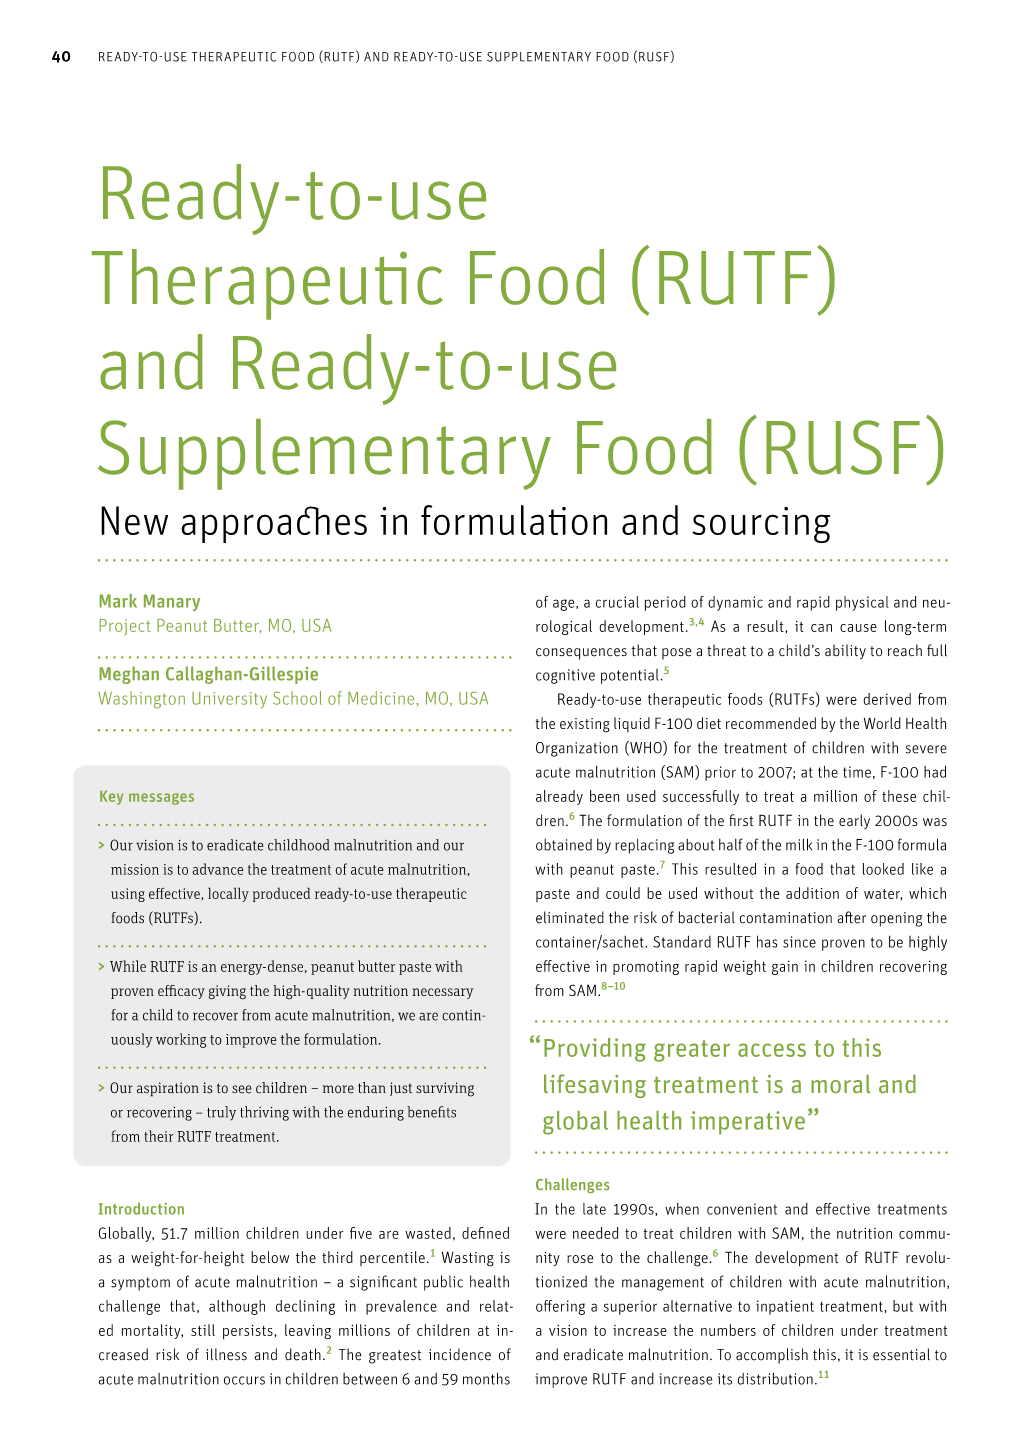 Rutf) and Ready-To-Use Supplementary Food (Rusf)